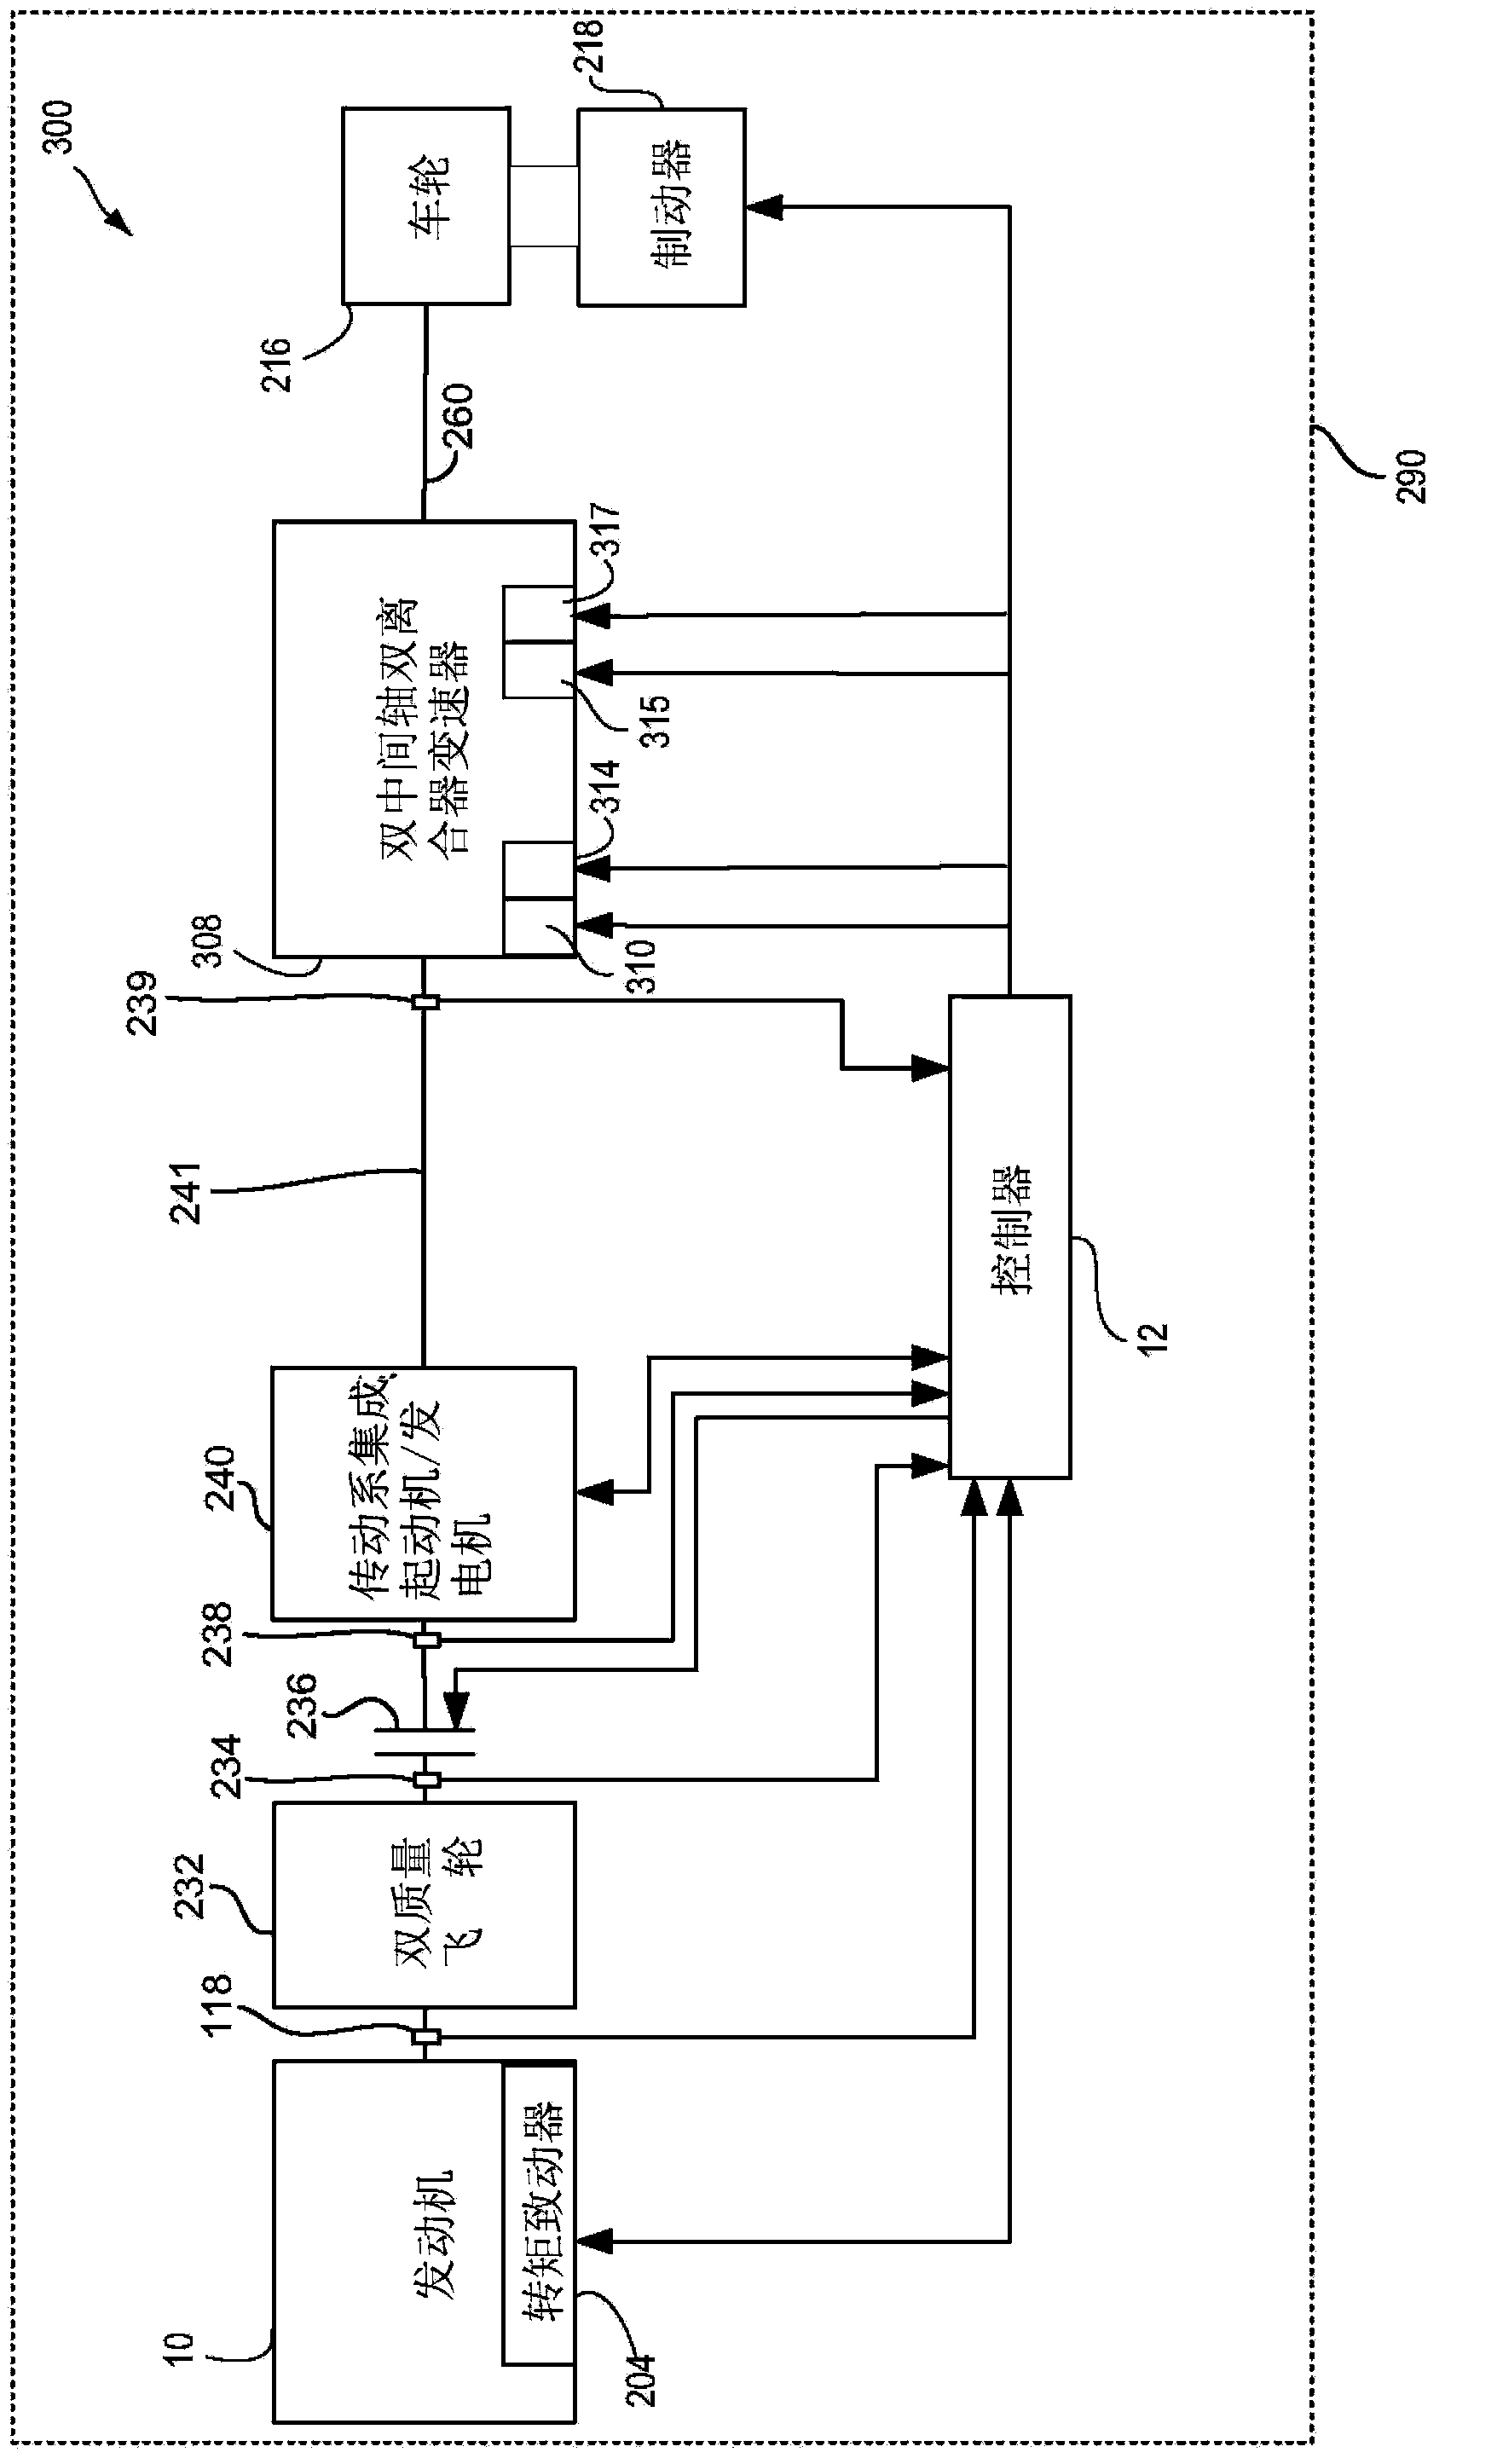 Method and system for vehicle power train